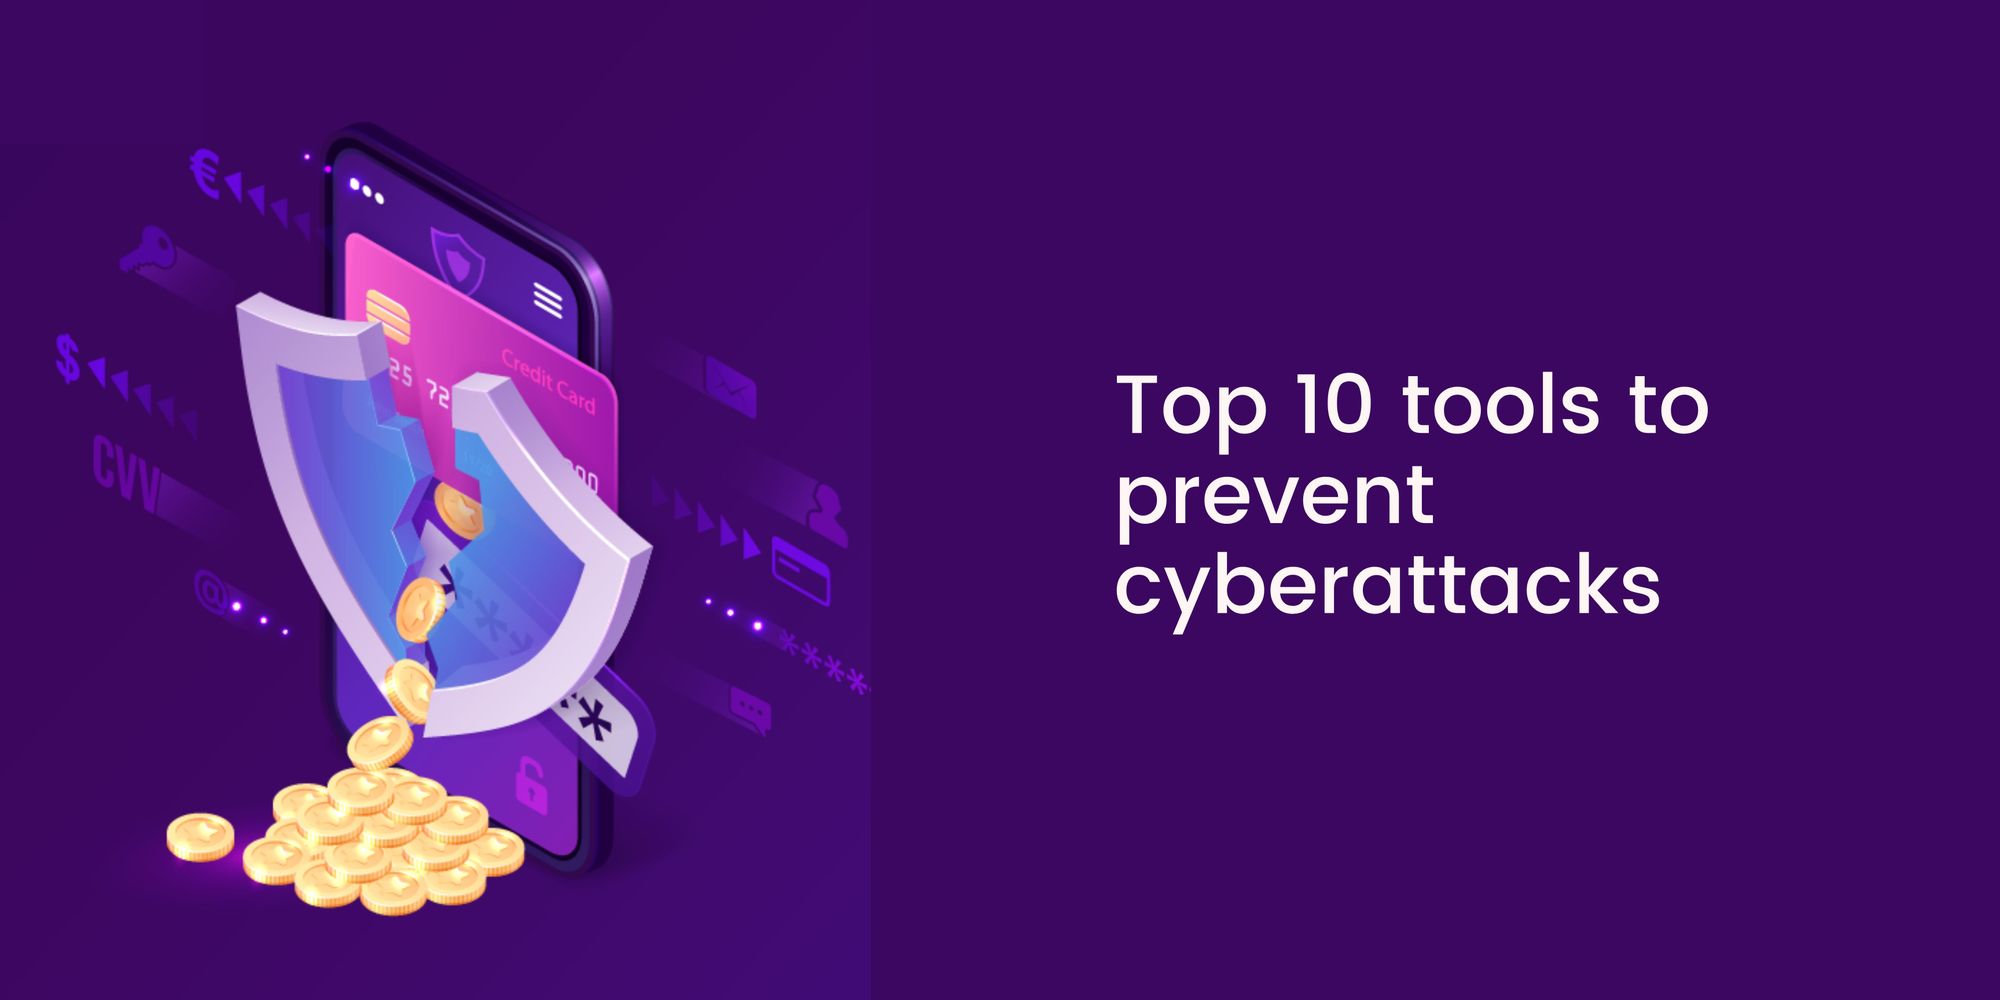 Top 10 tools to prevent cyberattacks